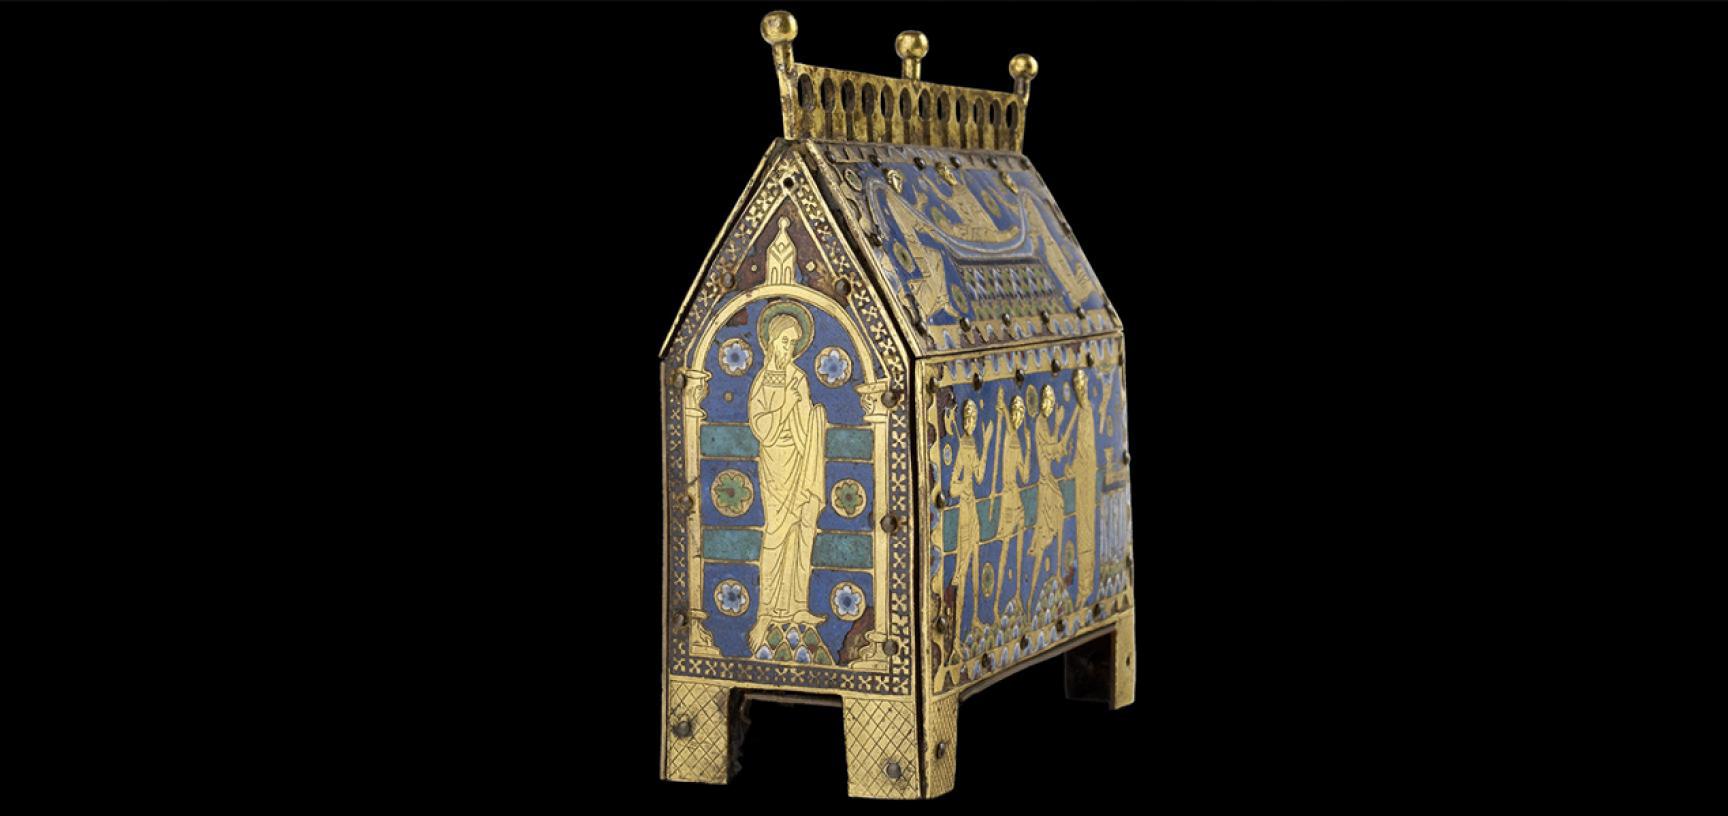 RELIQUARY CASKET OF ST THOMAS BECKET from the Ashmolean collections